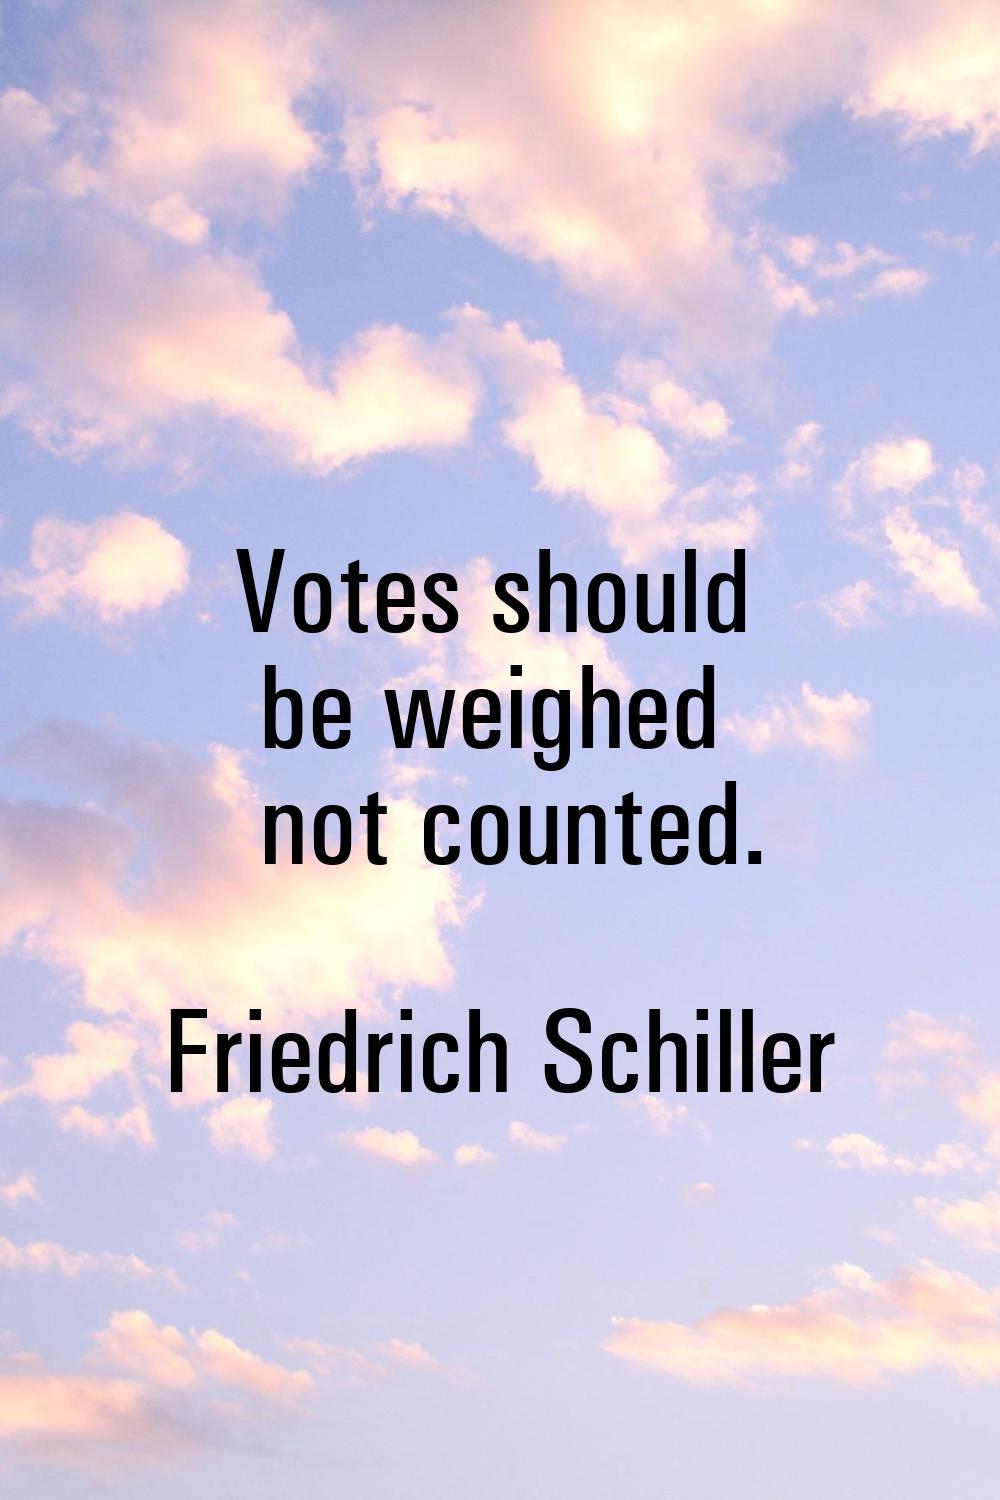 Votes should be weighed not counted.